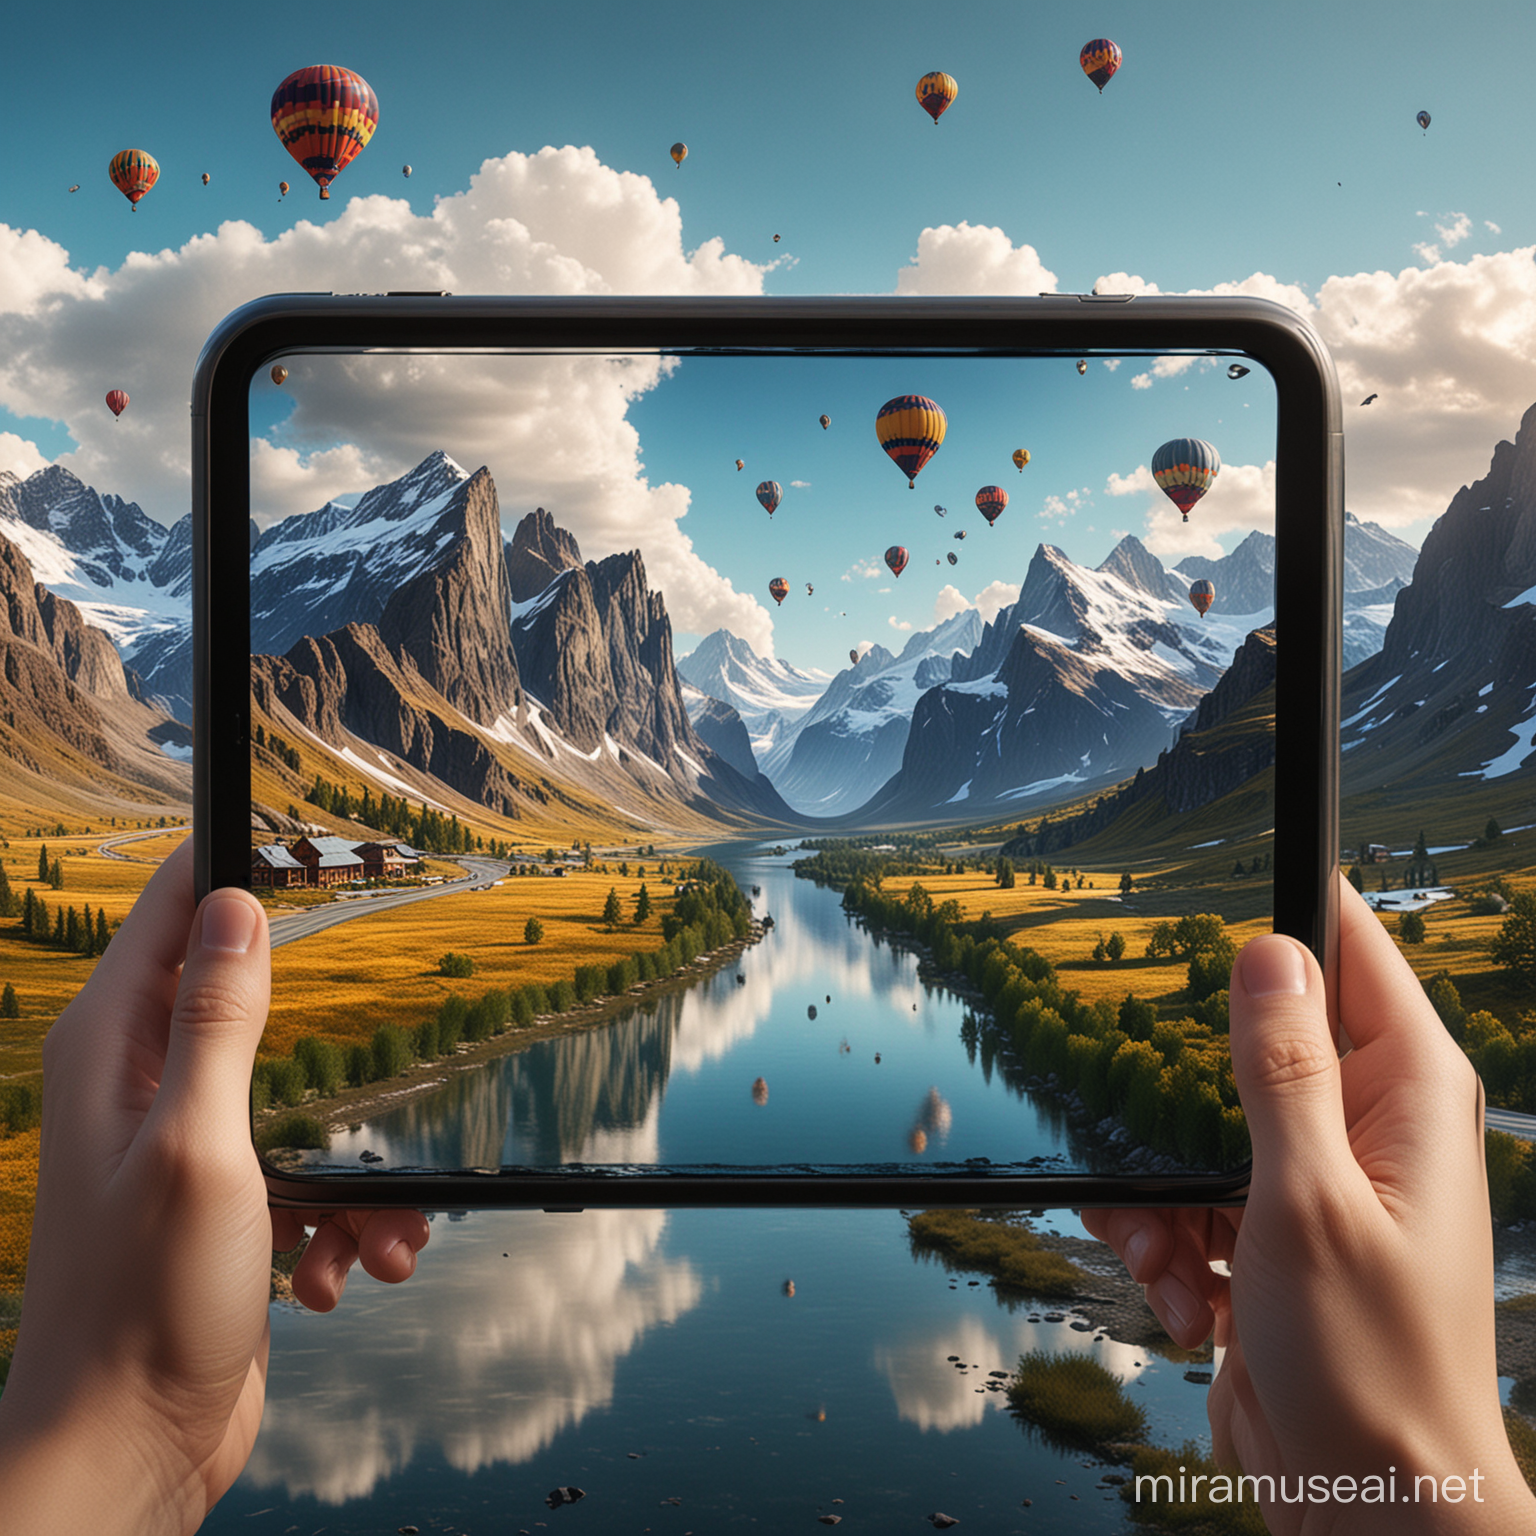 Smartphone Portal to a Surreal Nature World